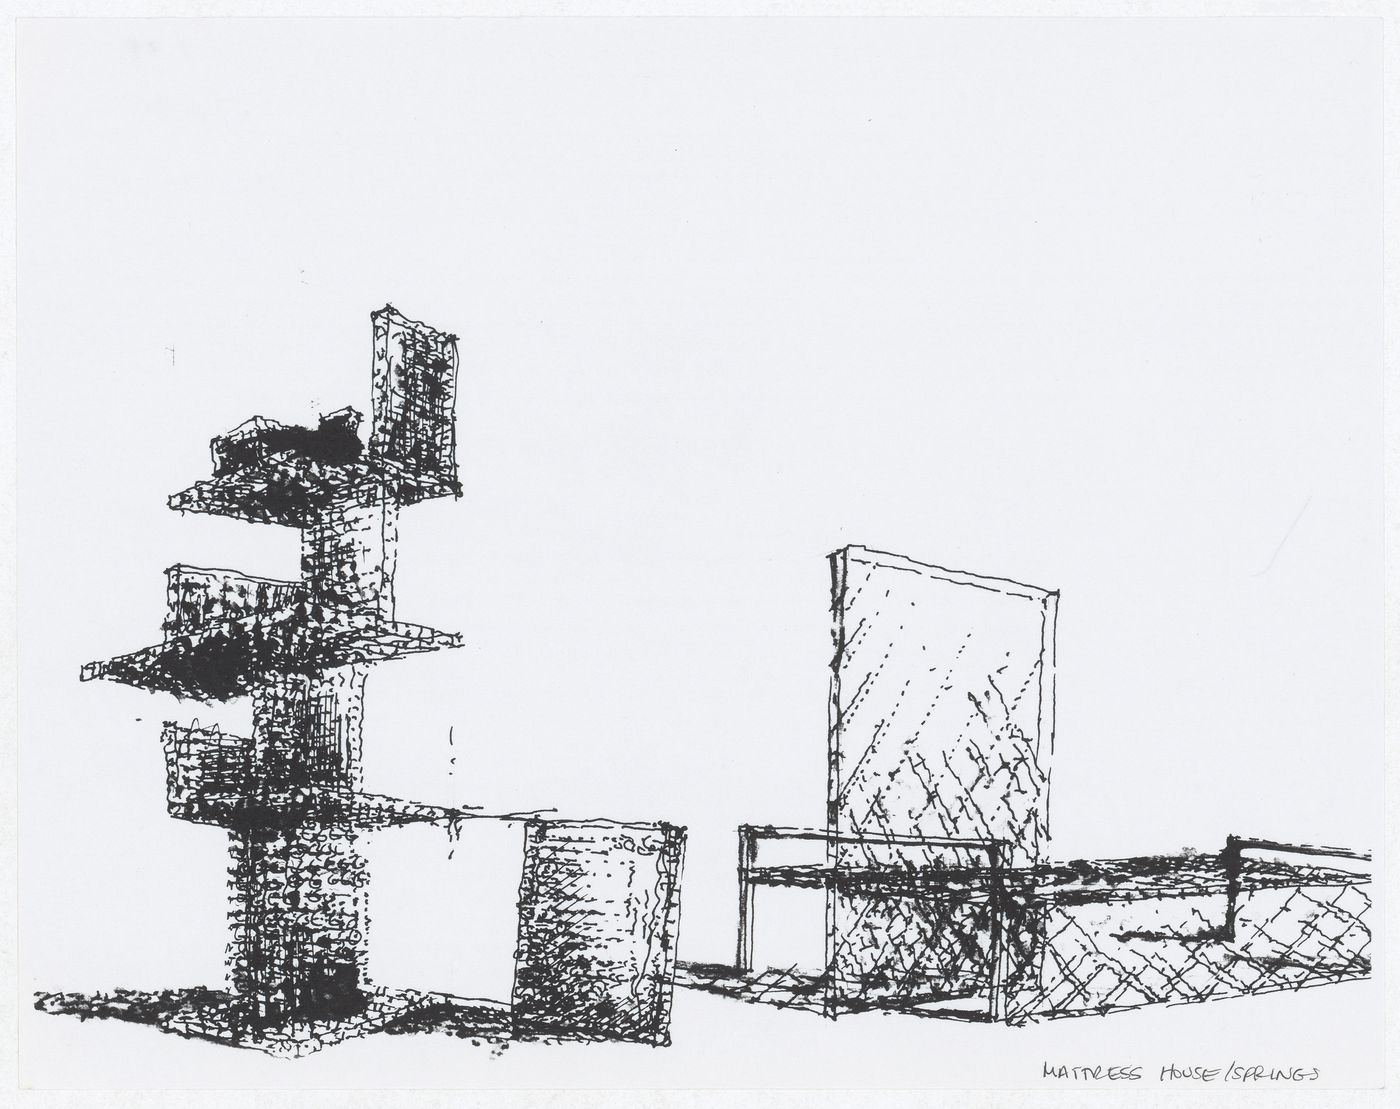 Drawing "Mattress House / Spring" for the exhibition on James Wines at the Venice Biennale